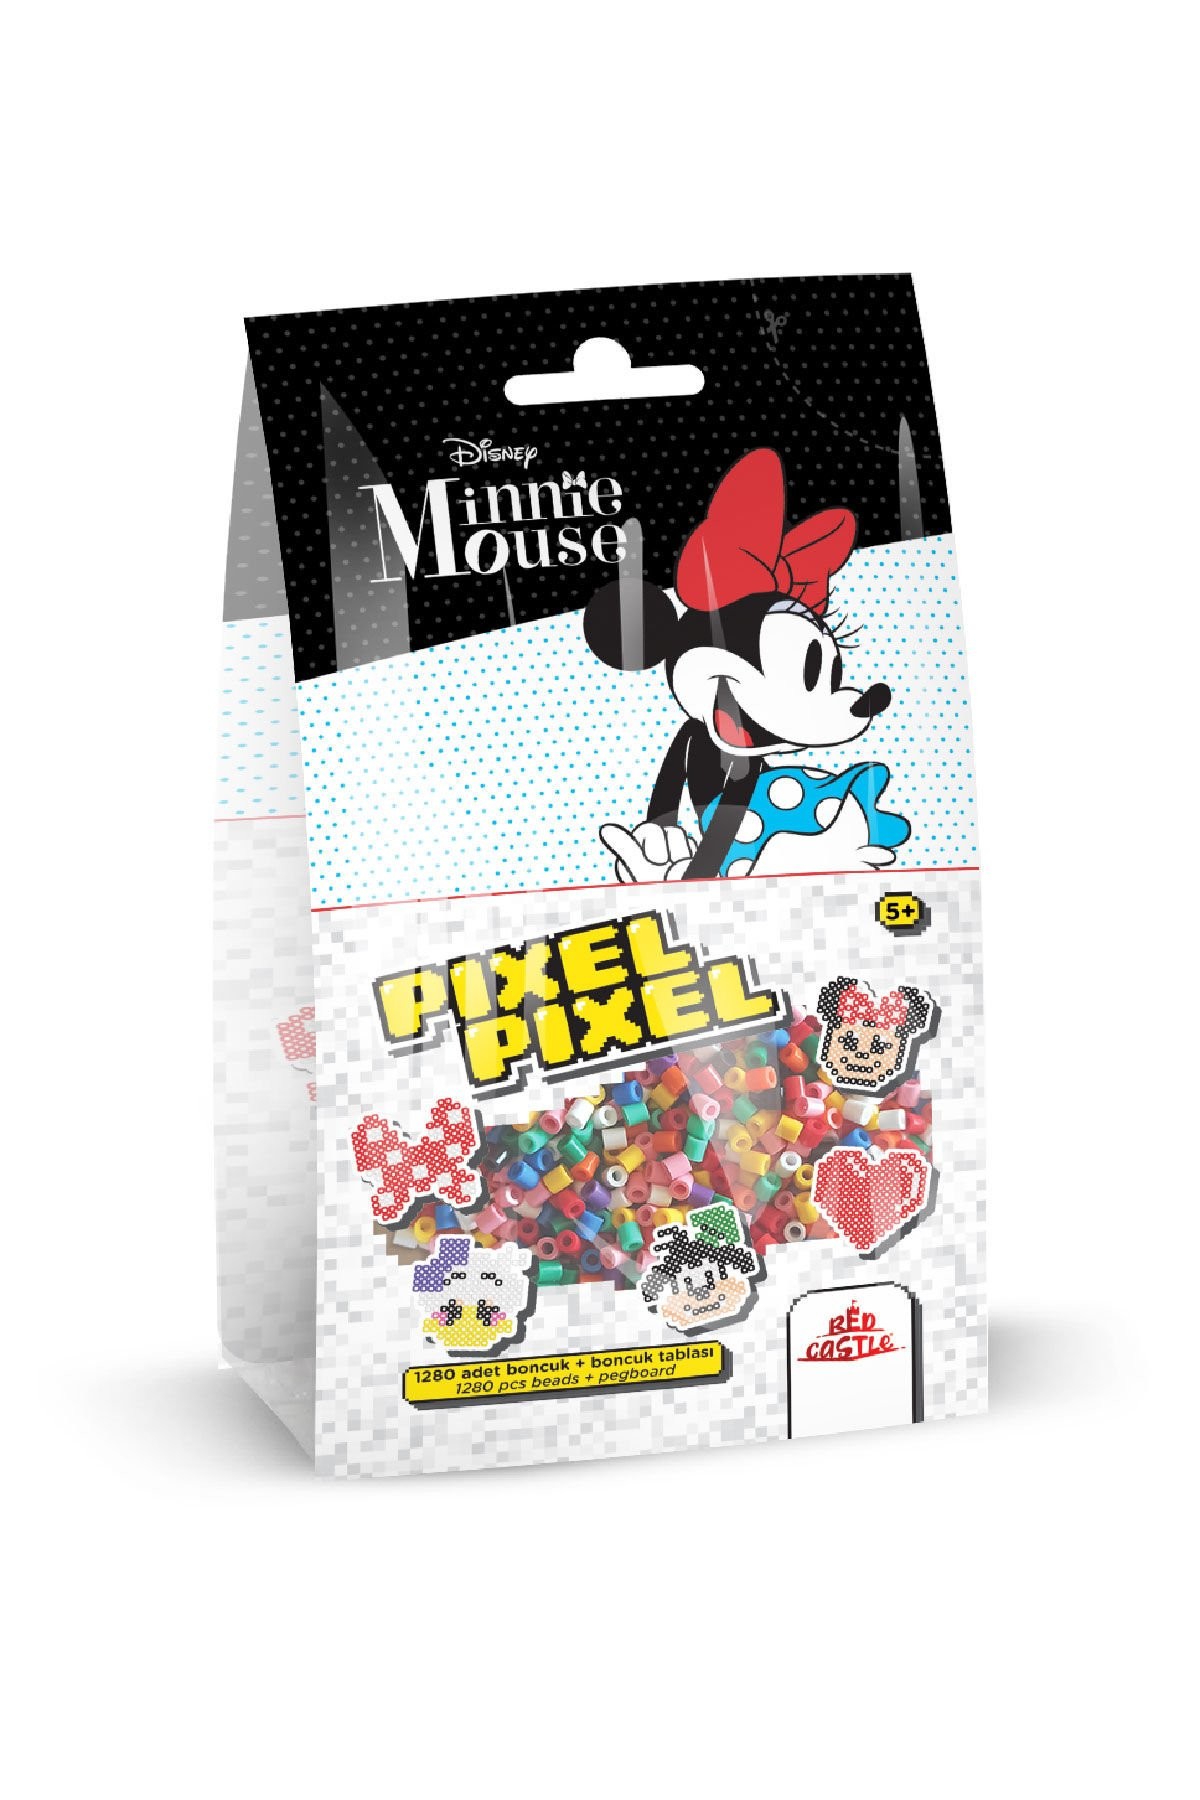 Pixel Pixel Beads Activity and Toy Set-Disney Minnie Mouse 1280 Beads B16-04